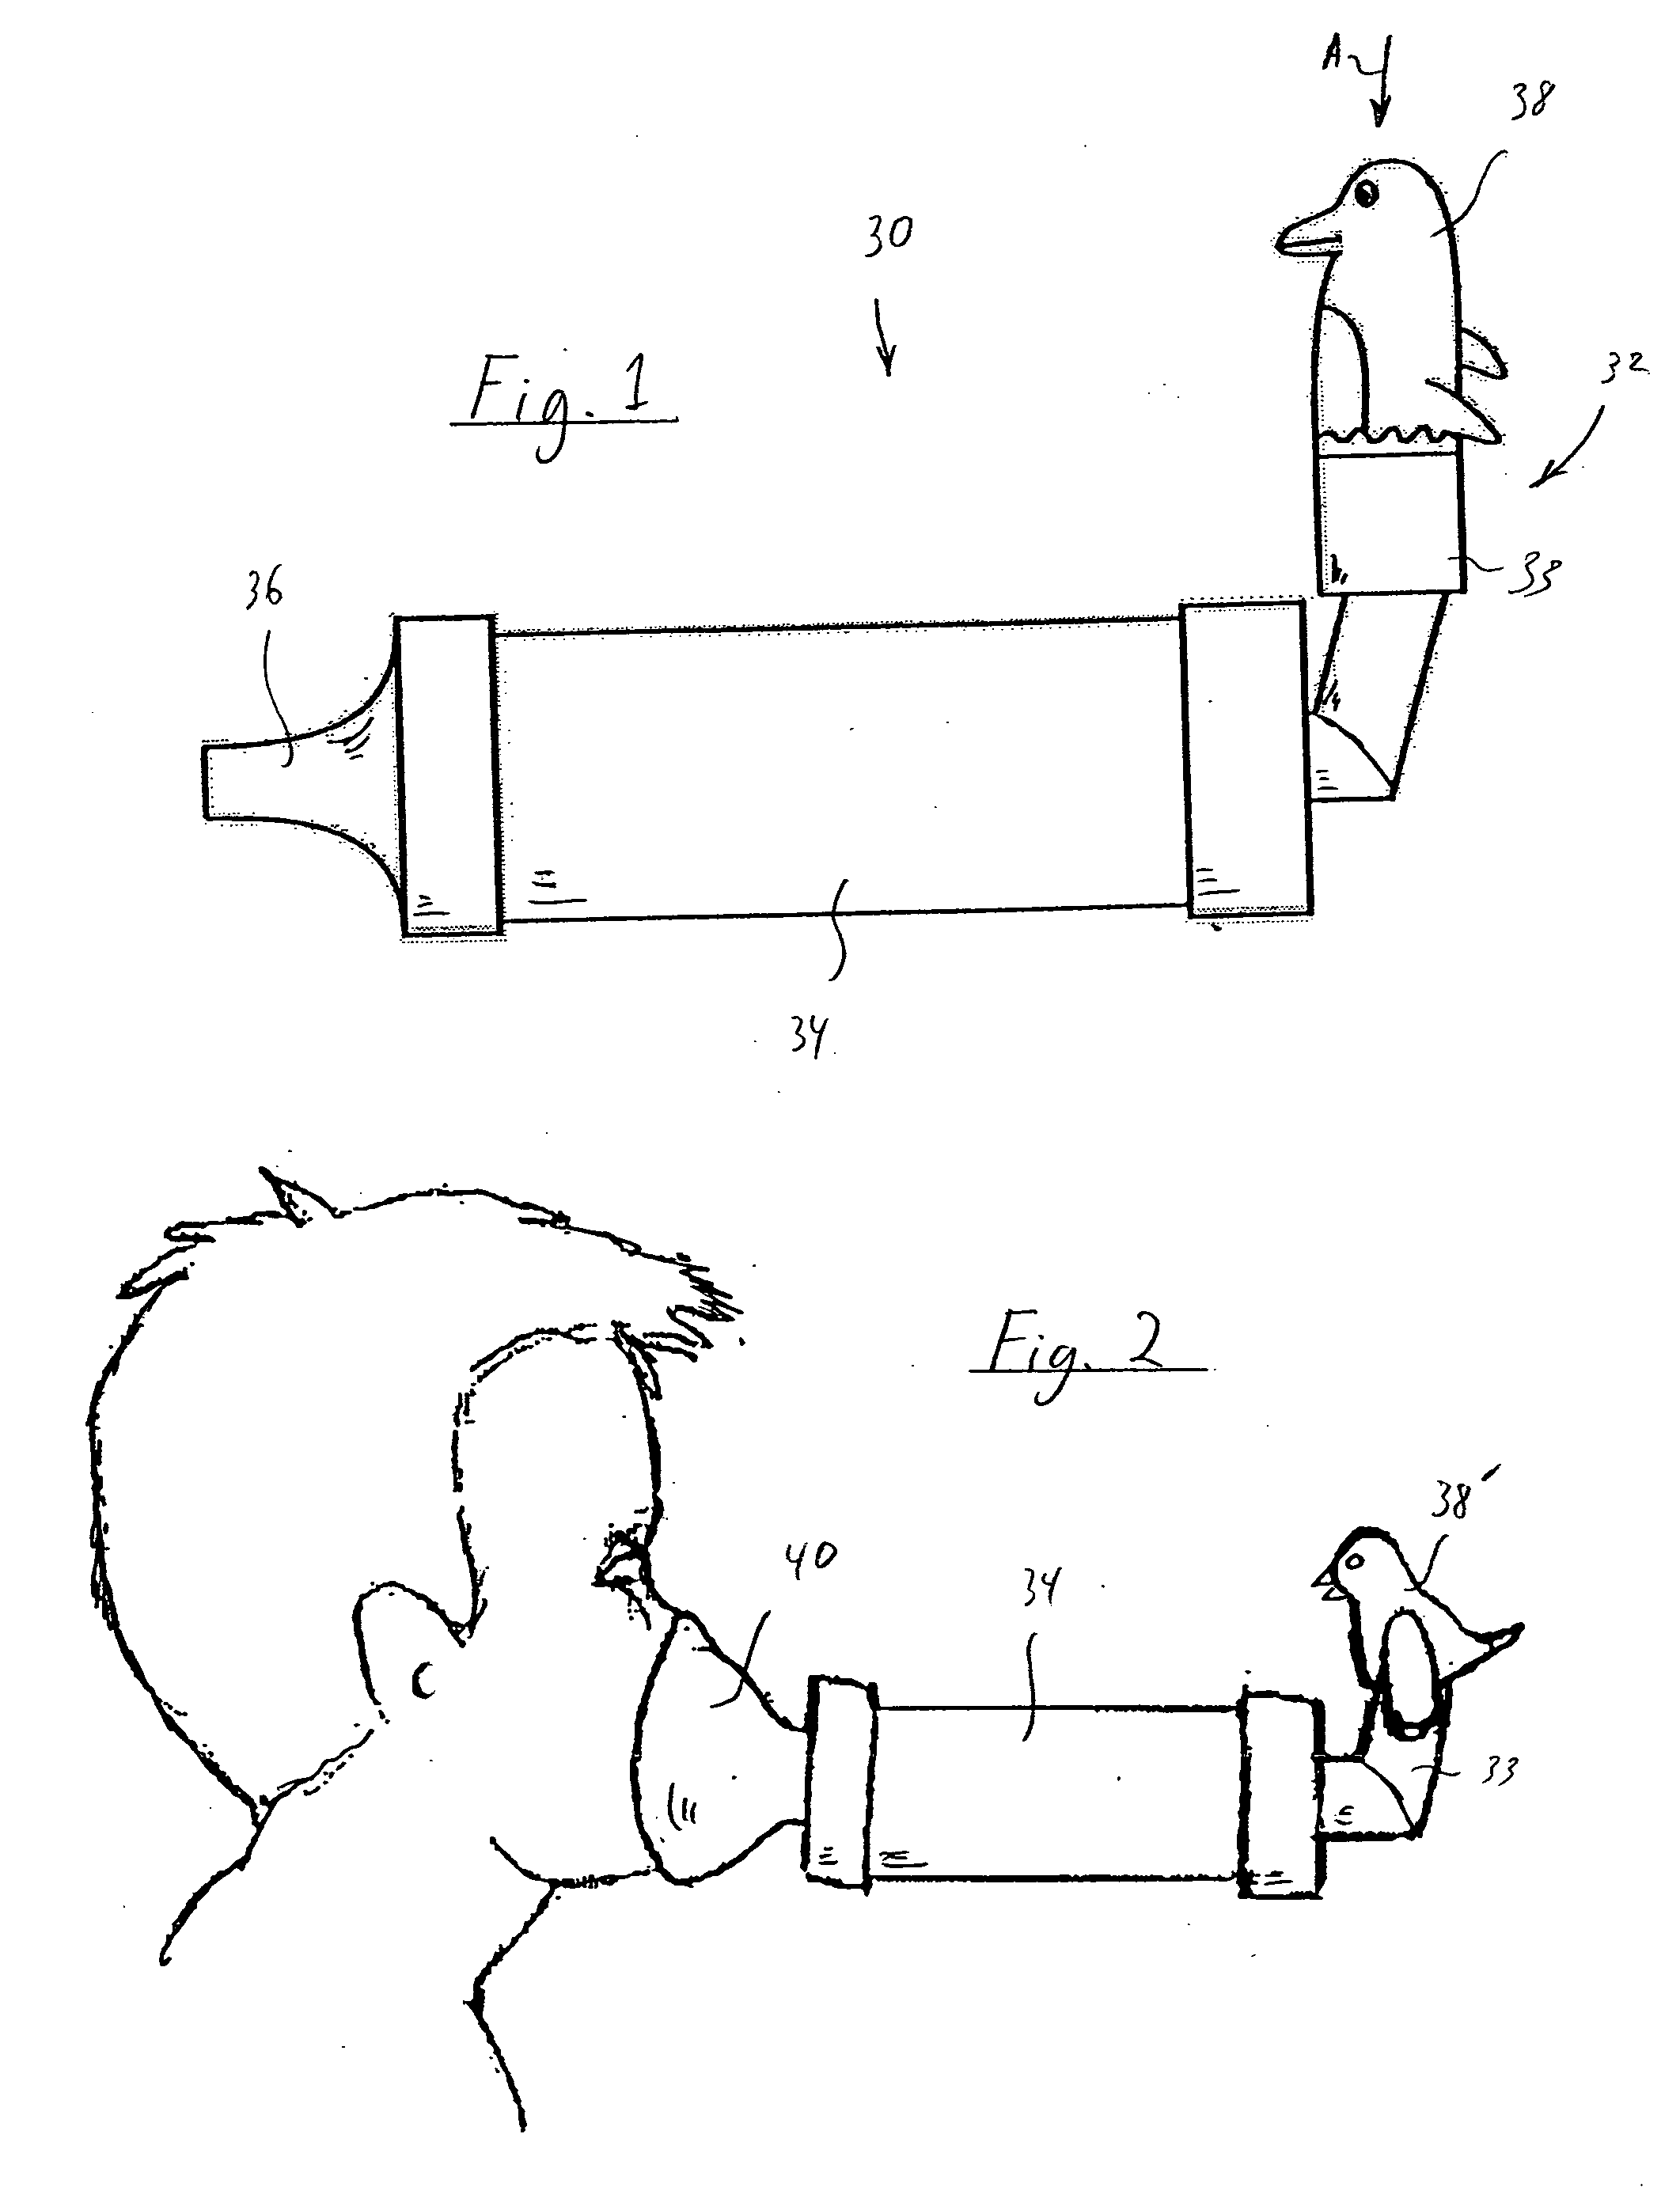 Interactive character for use with an aerosol medication delivery system